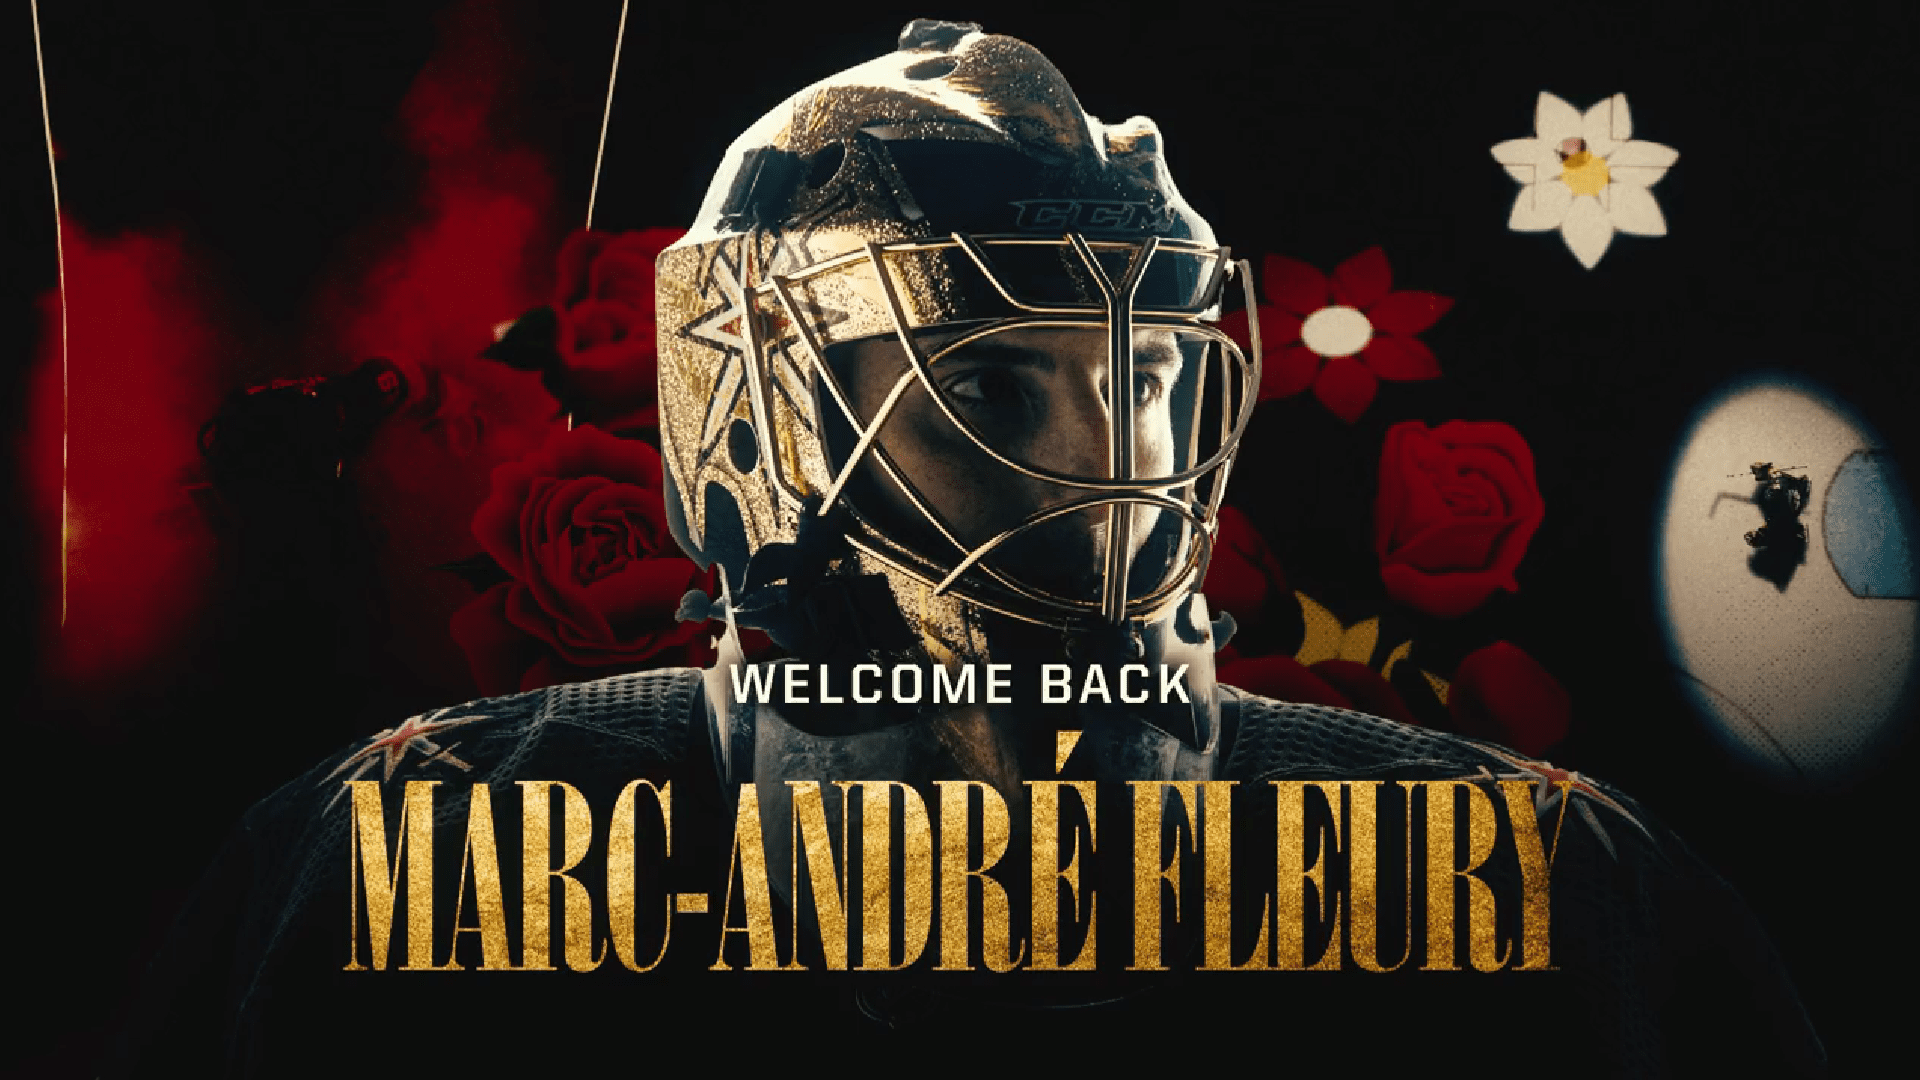 Oh, Flower got me': Marc-Andre Fleury's pranks have Wild teammates watching  their backs - The Rink Live